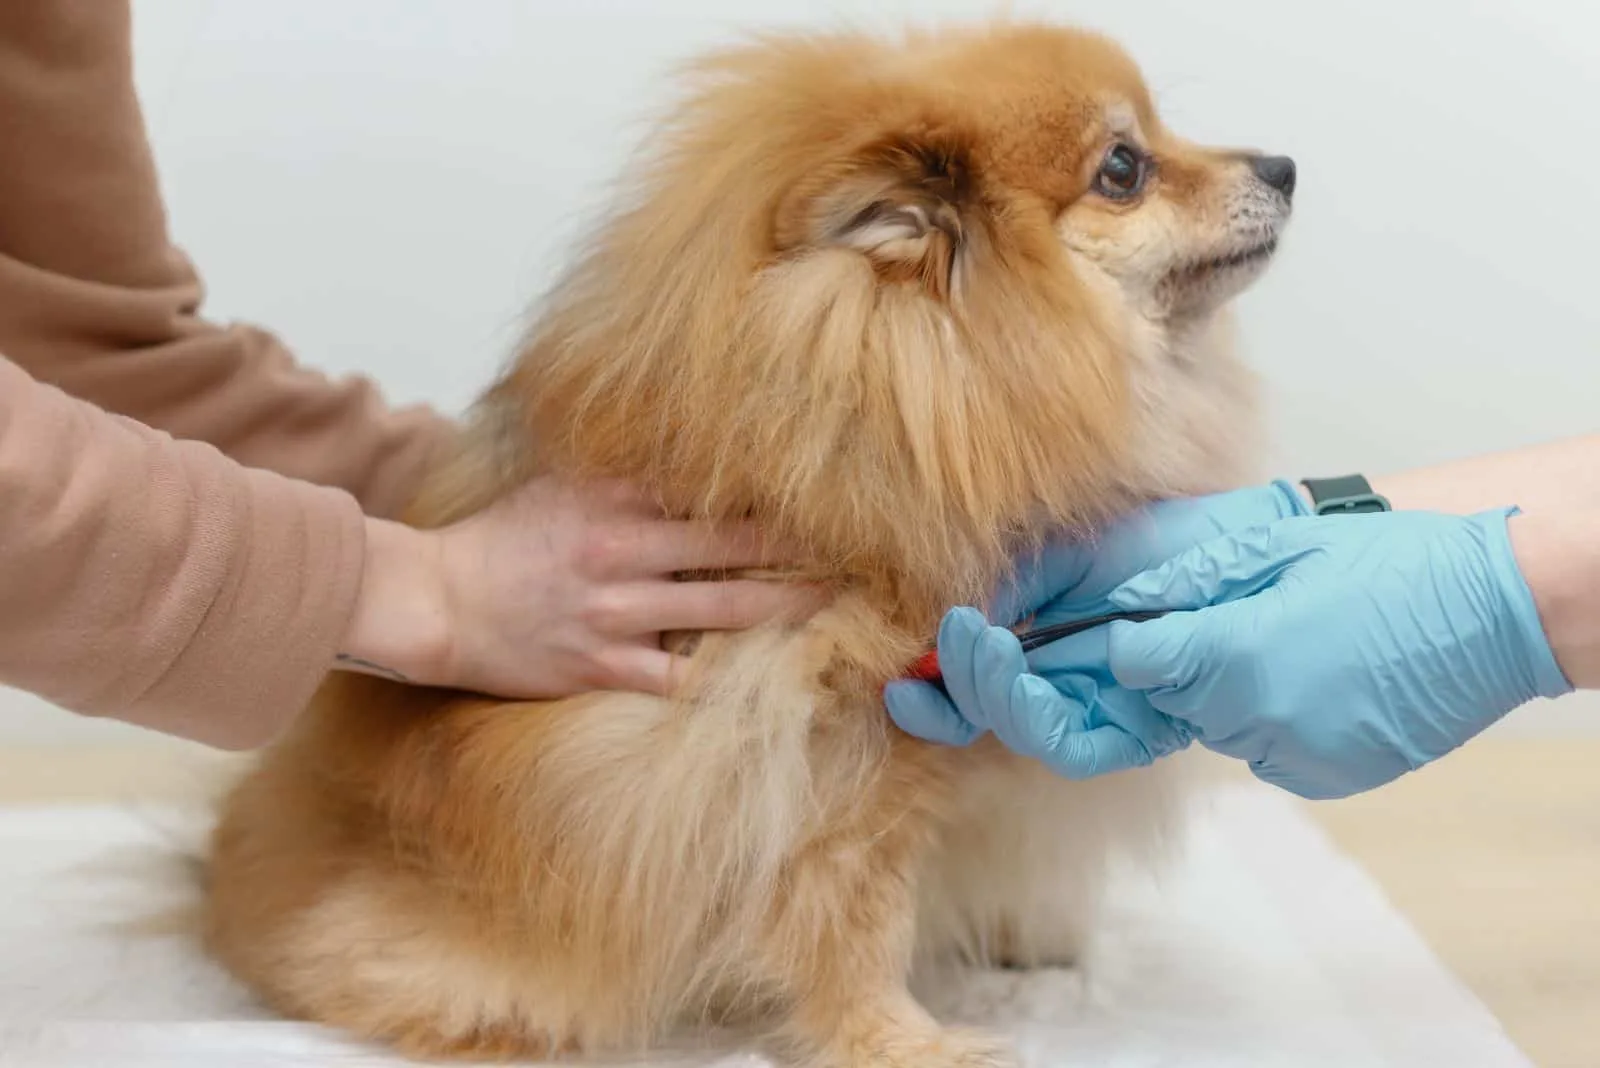 the veterinarian draws blood from the pomeranian